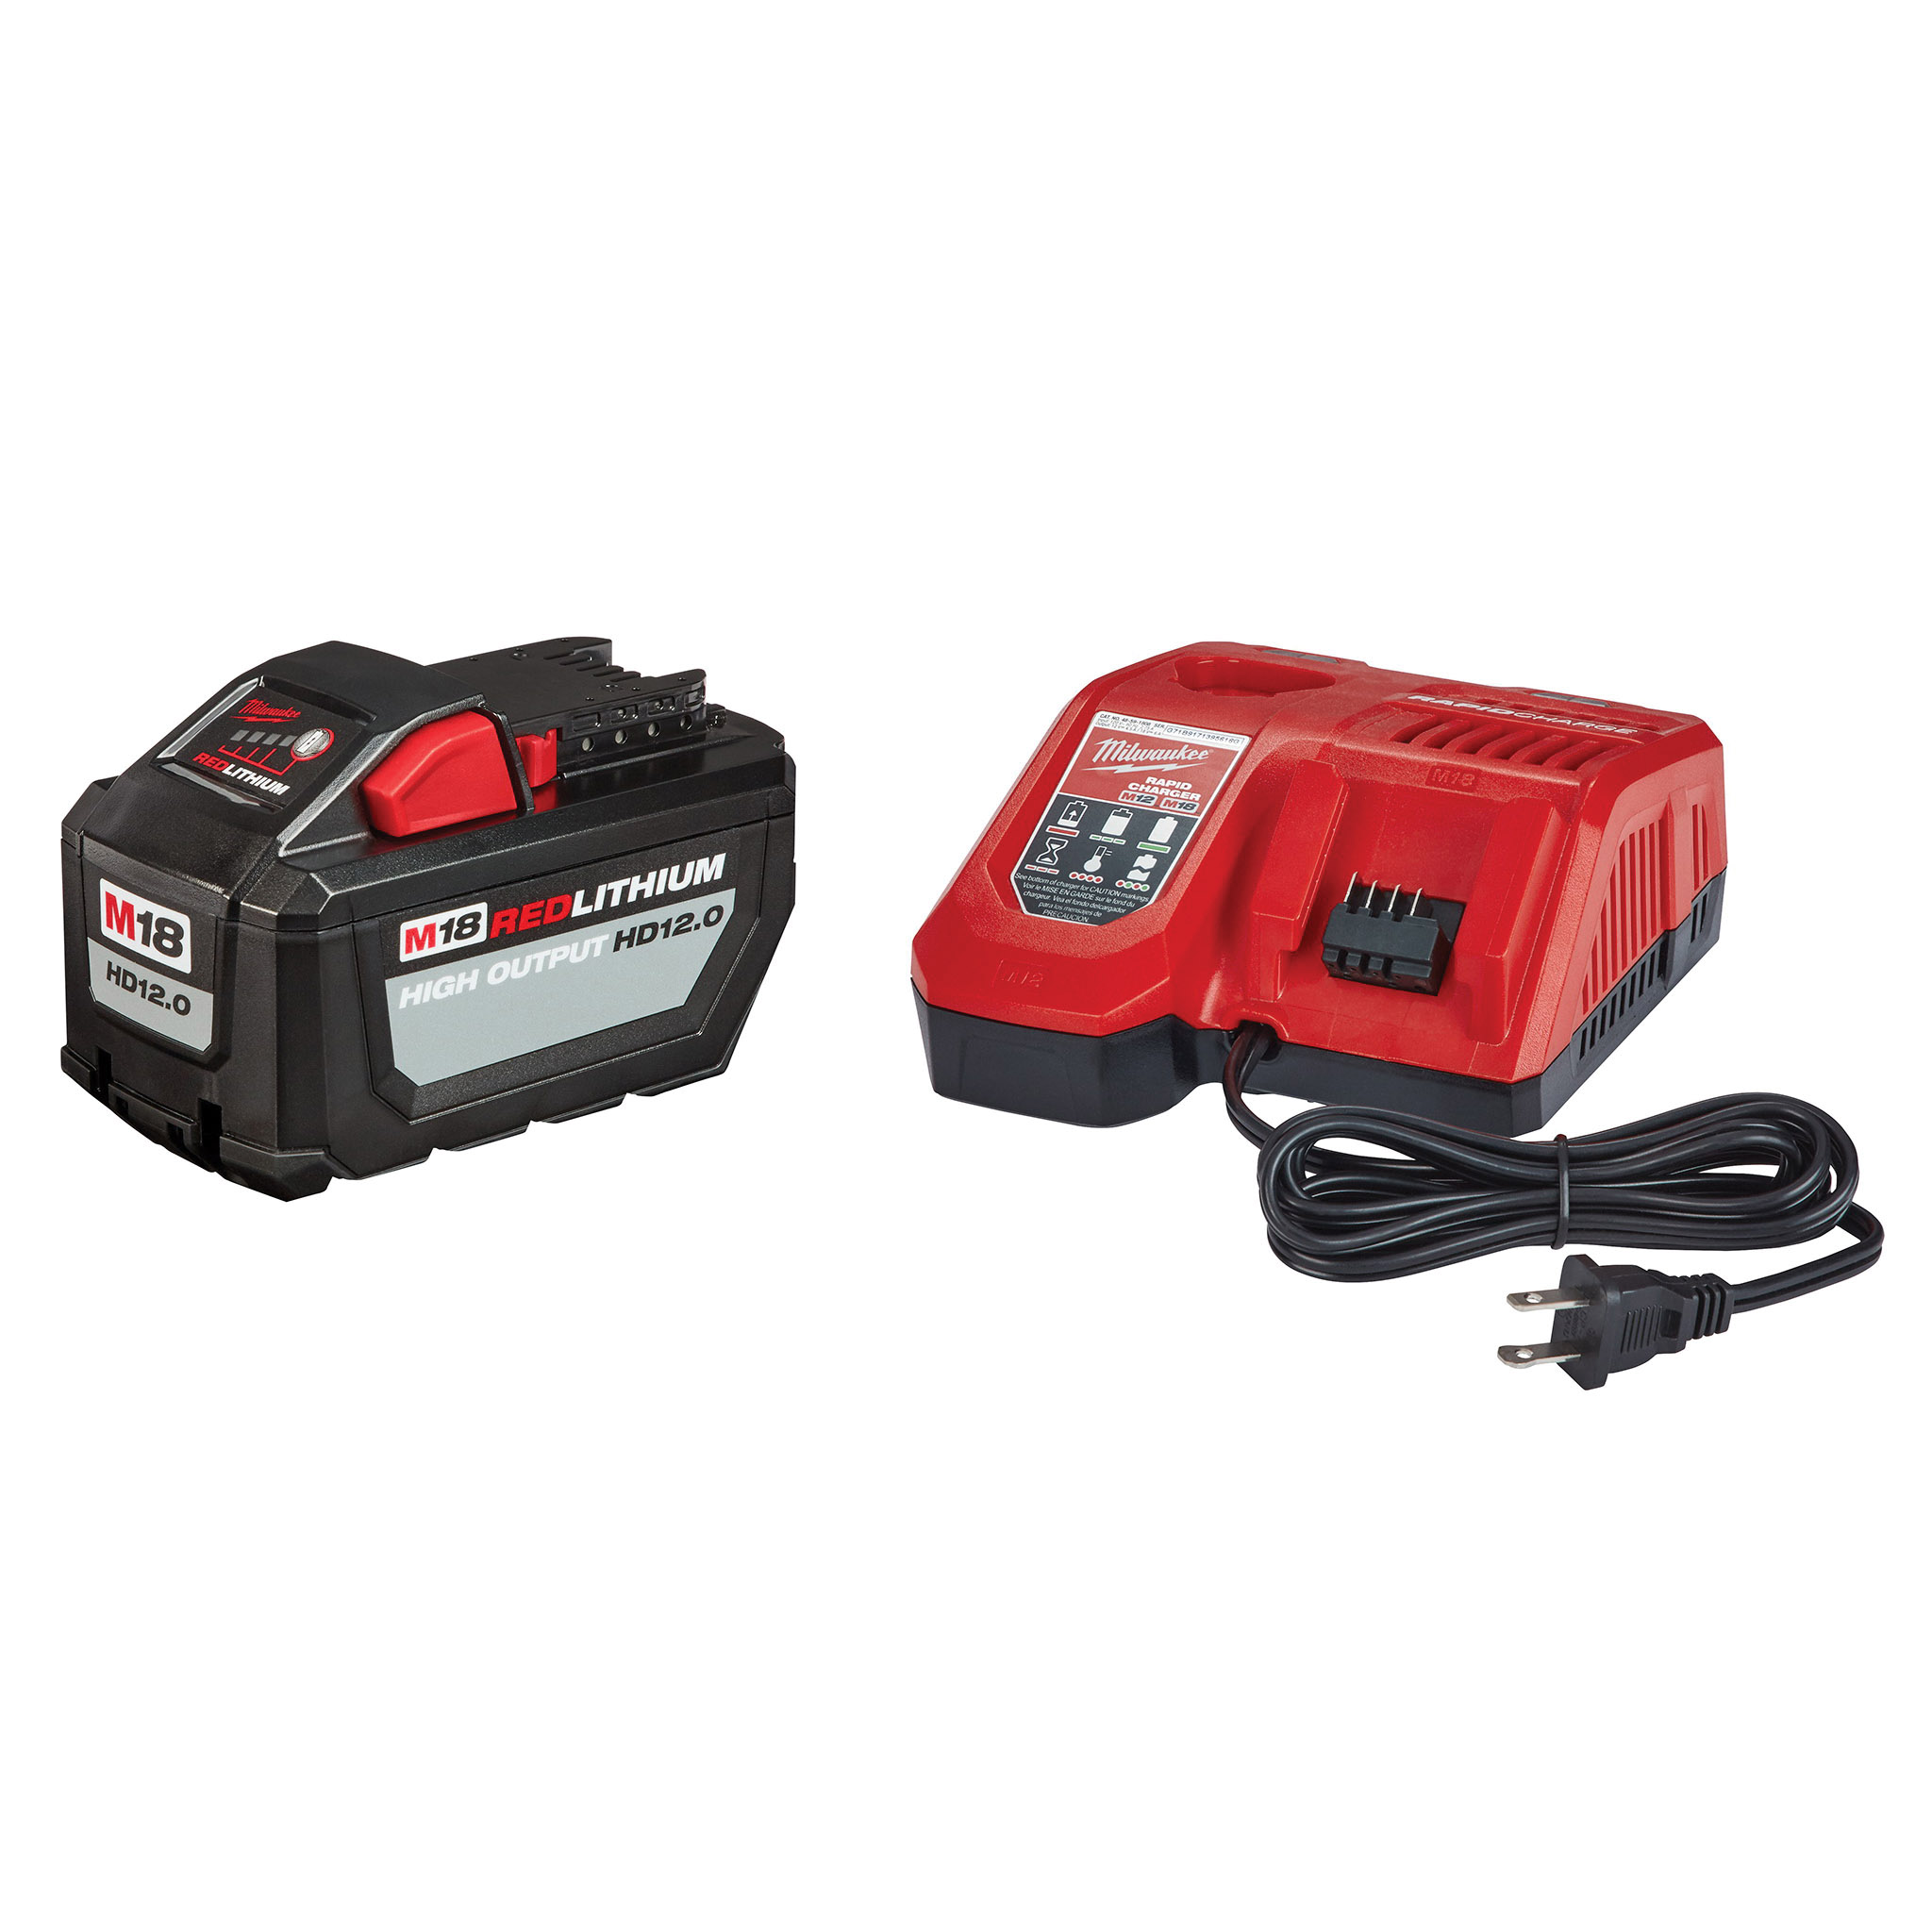 M18 REDLITHIUM 48-59-1200 Battery and Charger Starter Kit, 120 VAC Input, 18 V Output, 12 Ah, 2 hr Charge